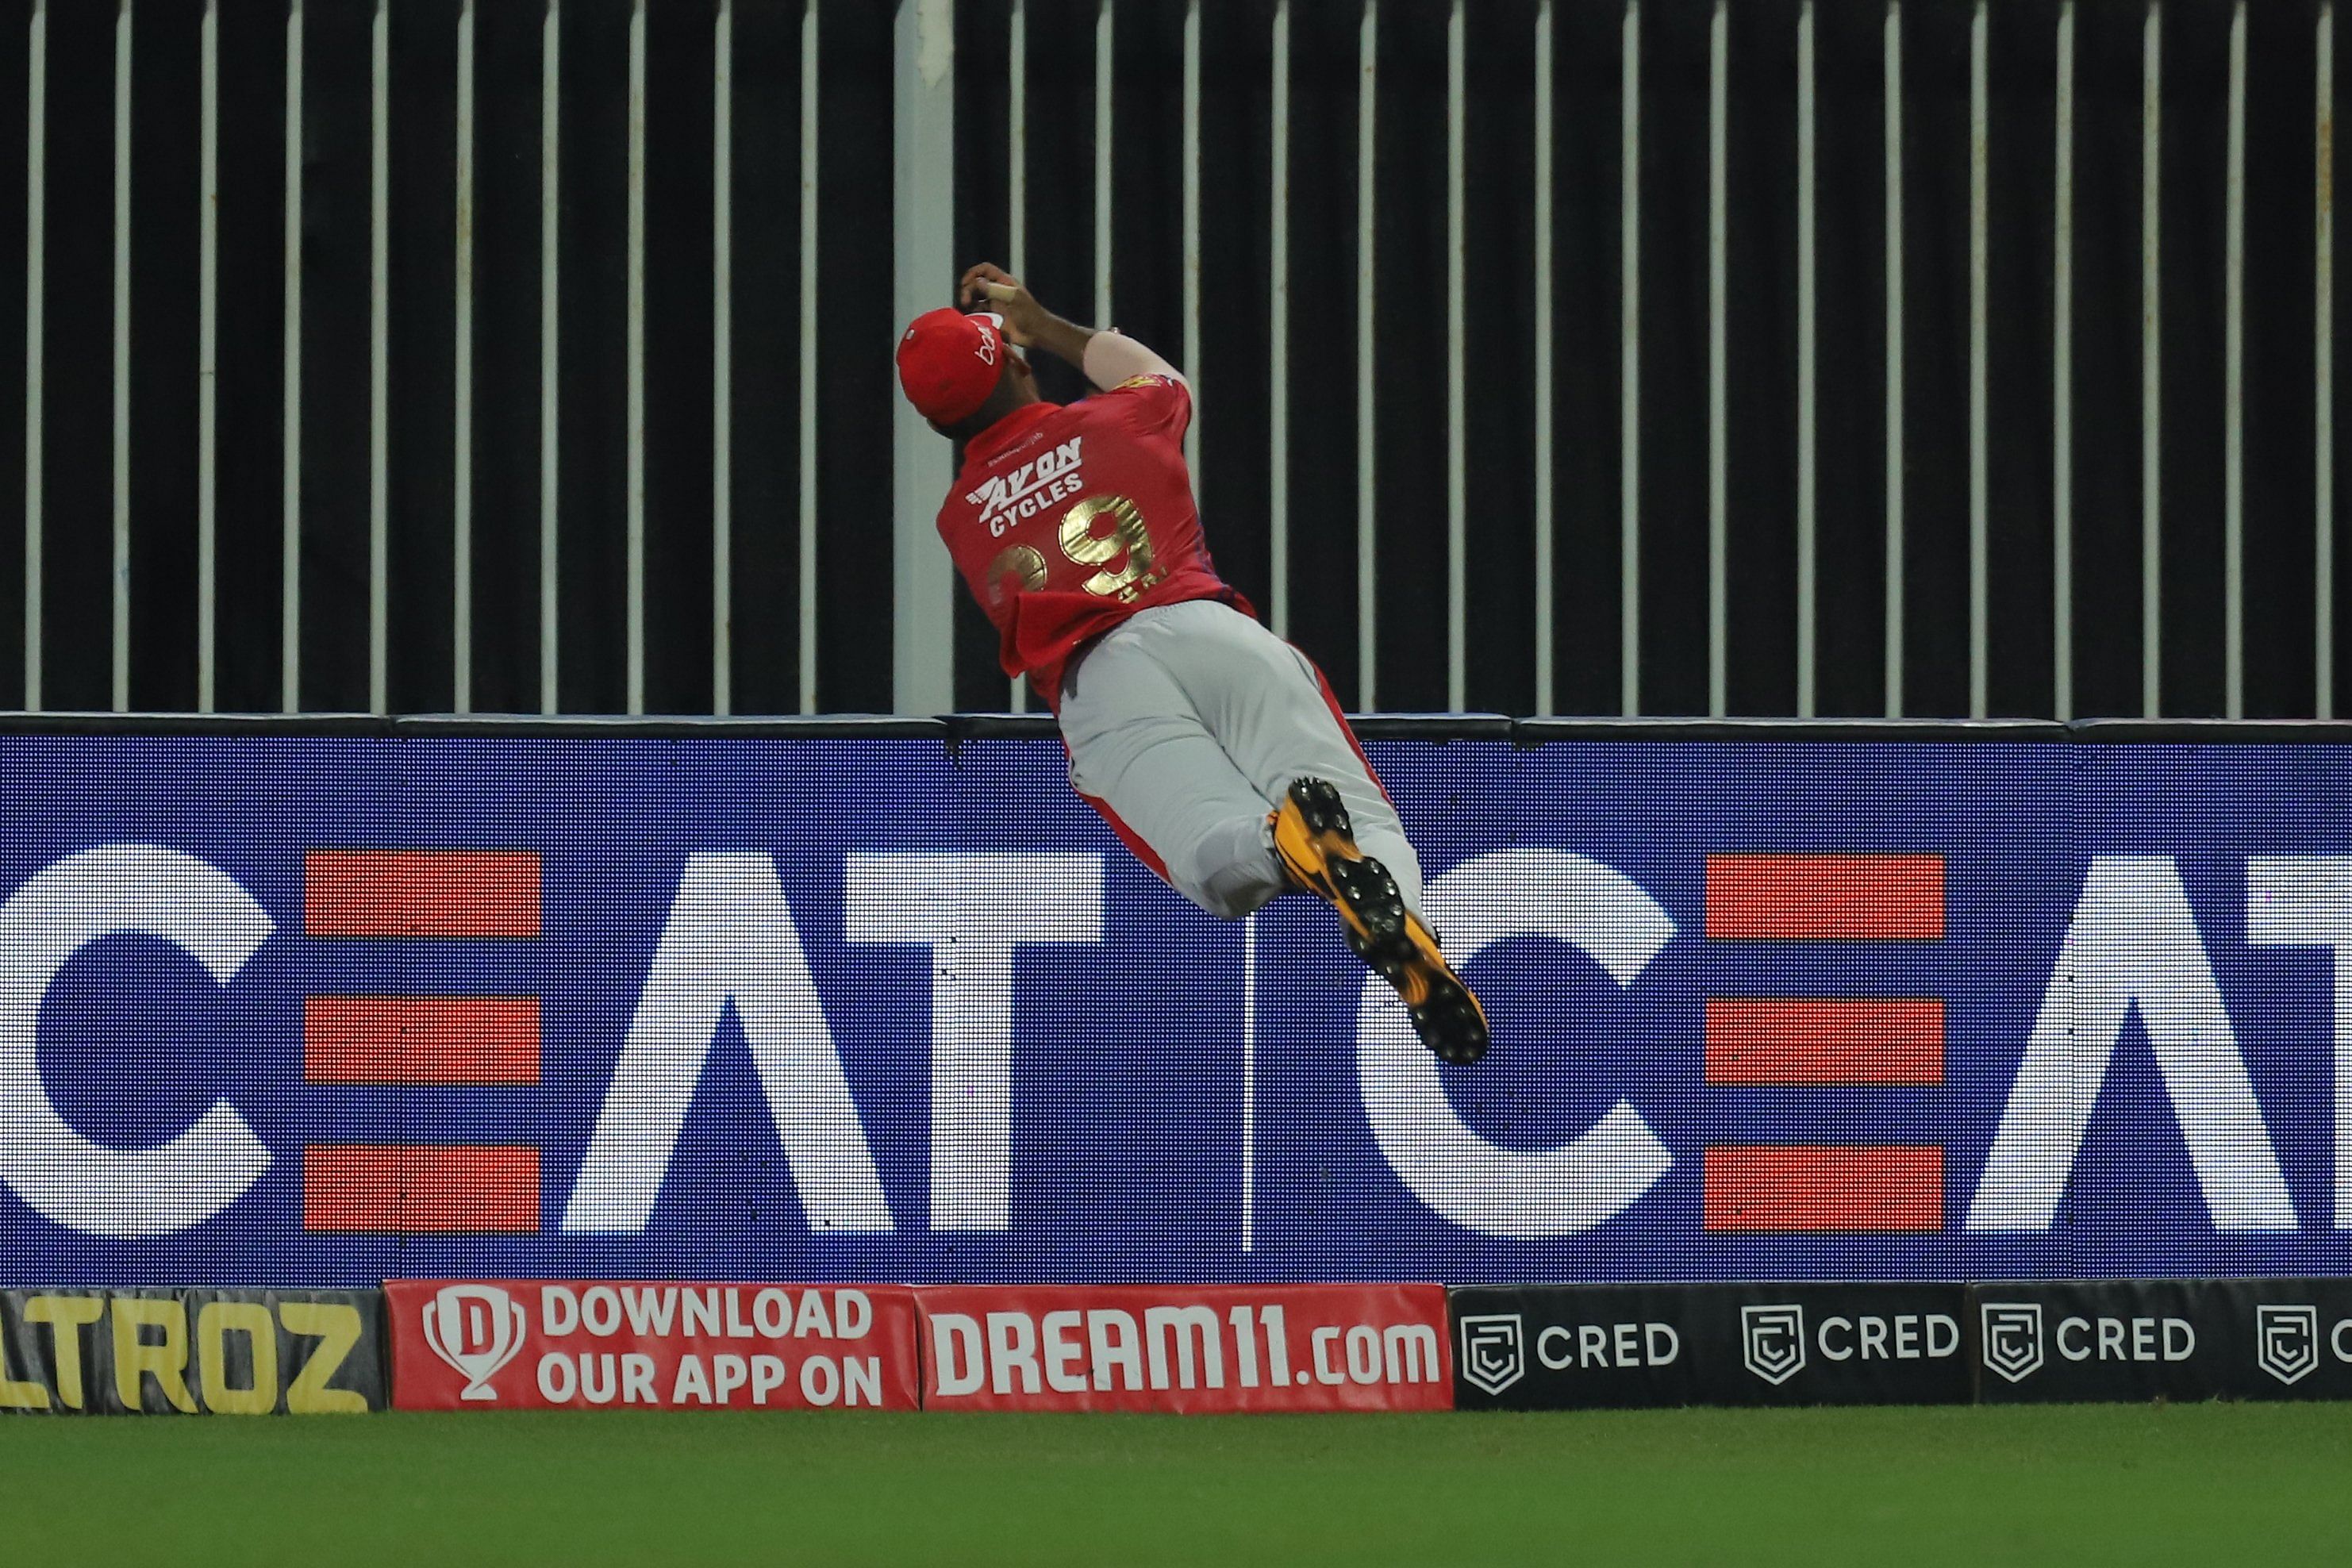 A snap of Nicholas Pooran’s acrobatic effort to save a six for KXIP. Credit: Twitter/@lionsdenkxip